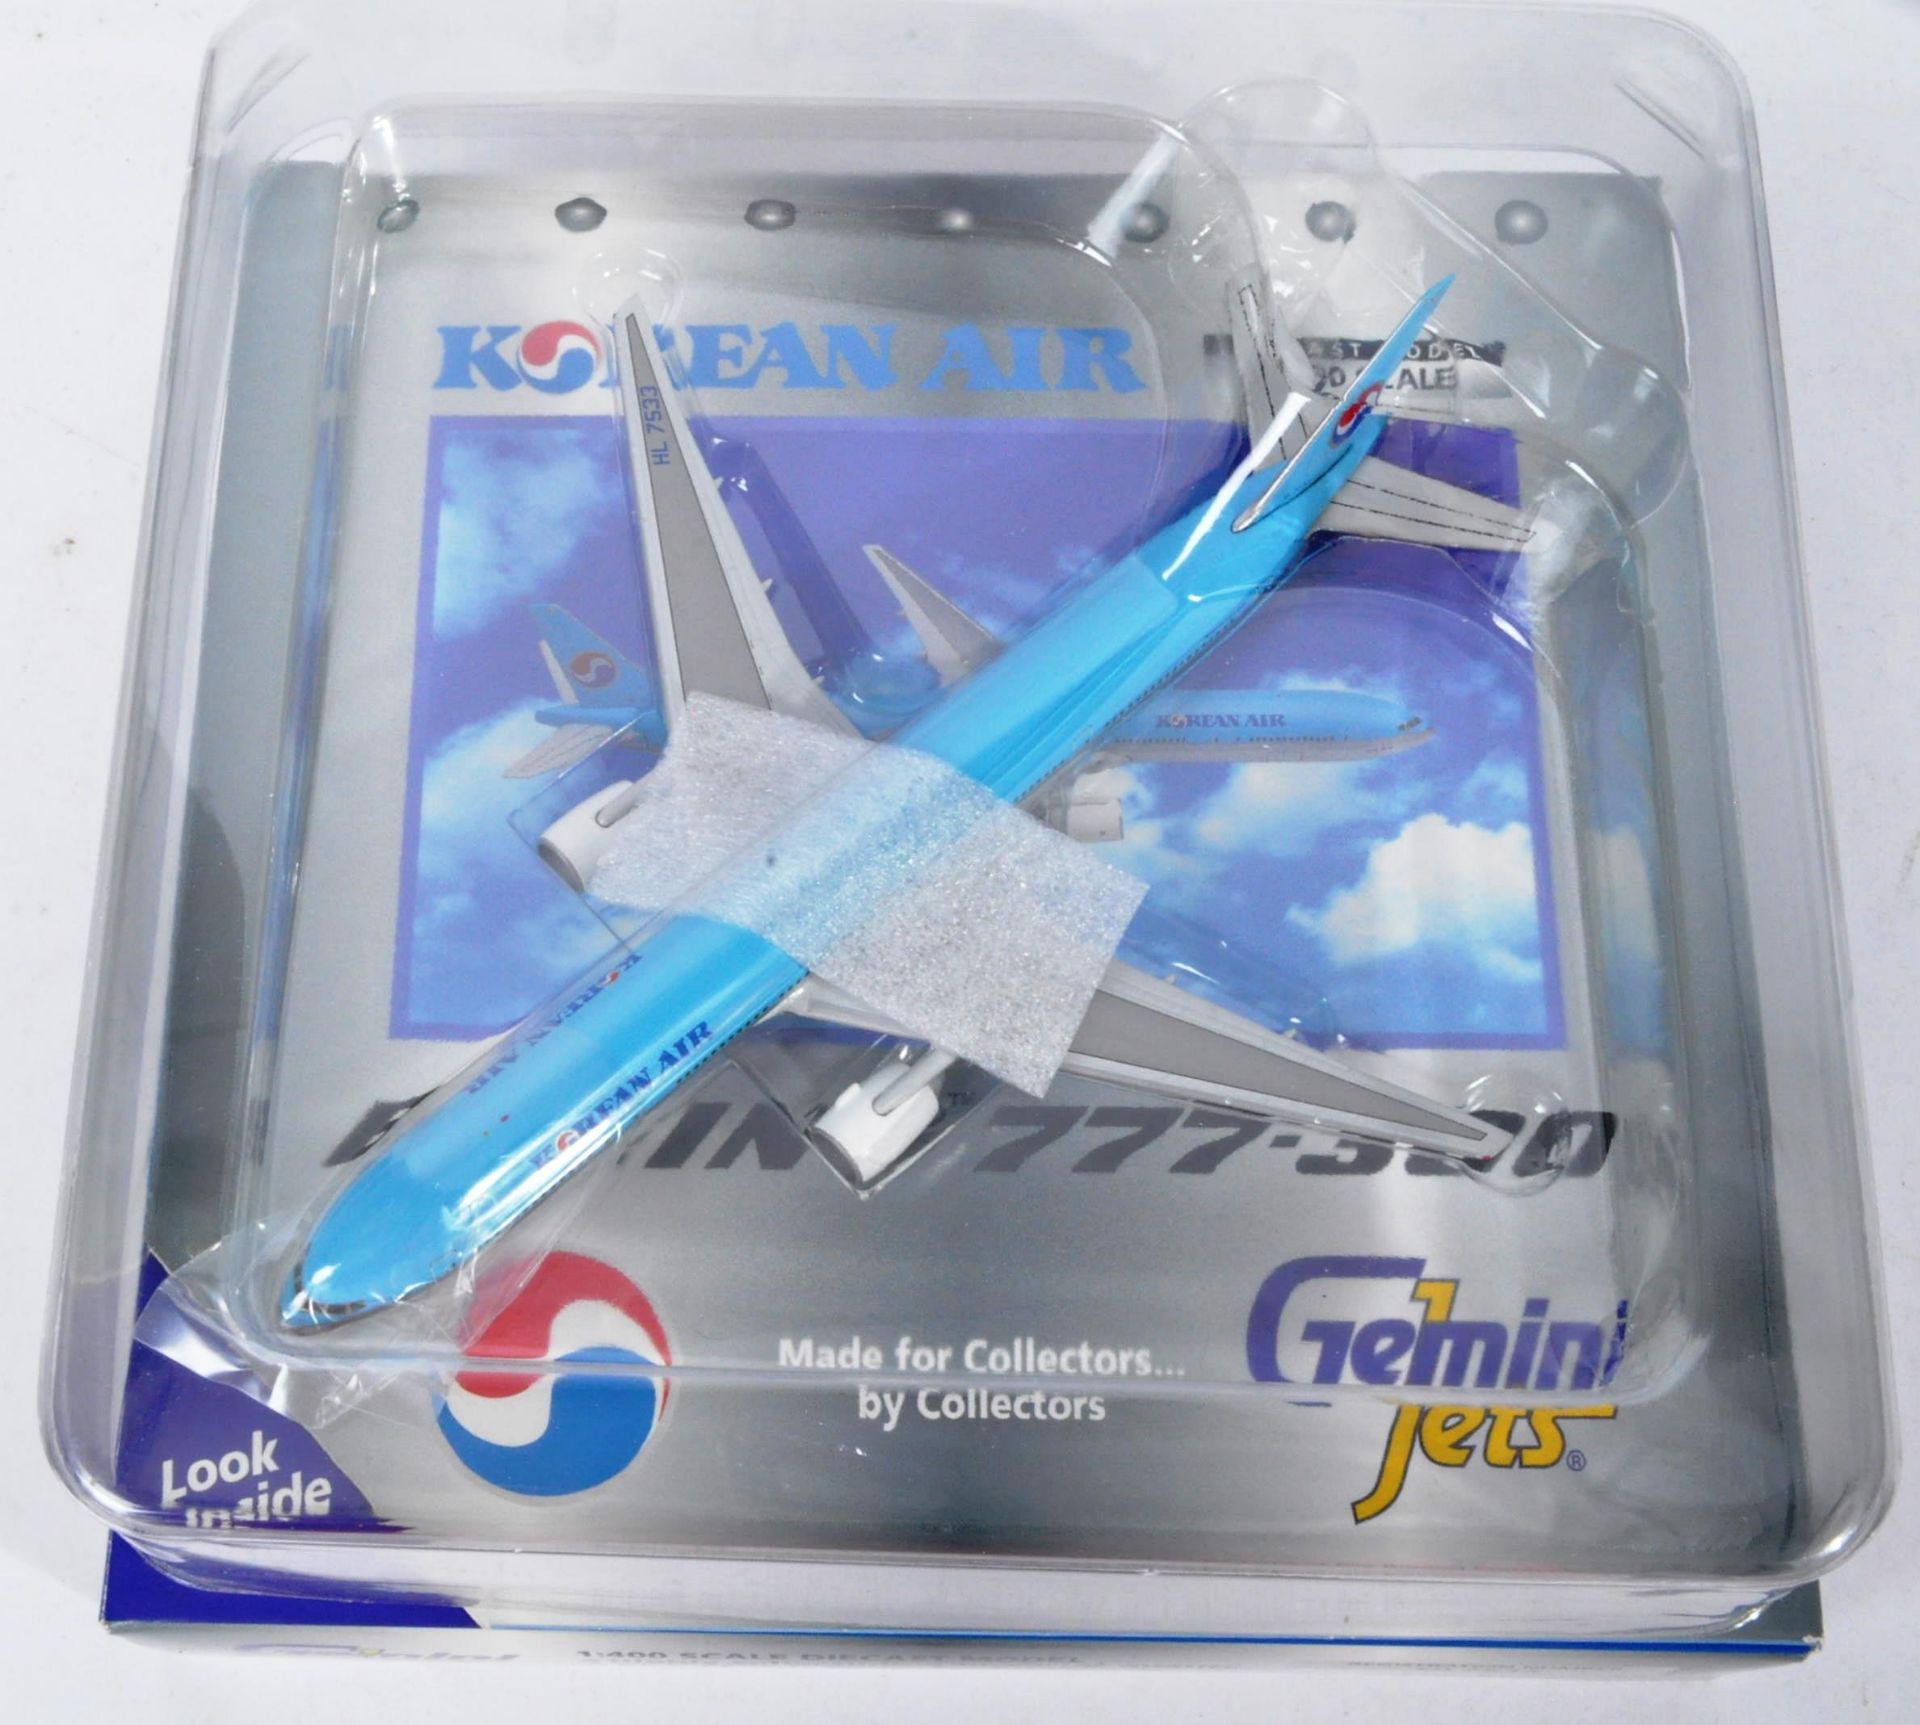 COLLECTION OF X4 GEMINI JETS DIECAST MODEL AIRCRAFTS - Image 2 of 5